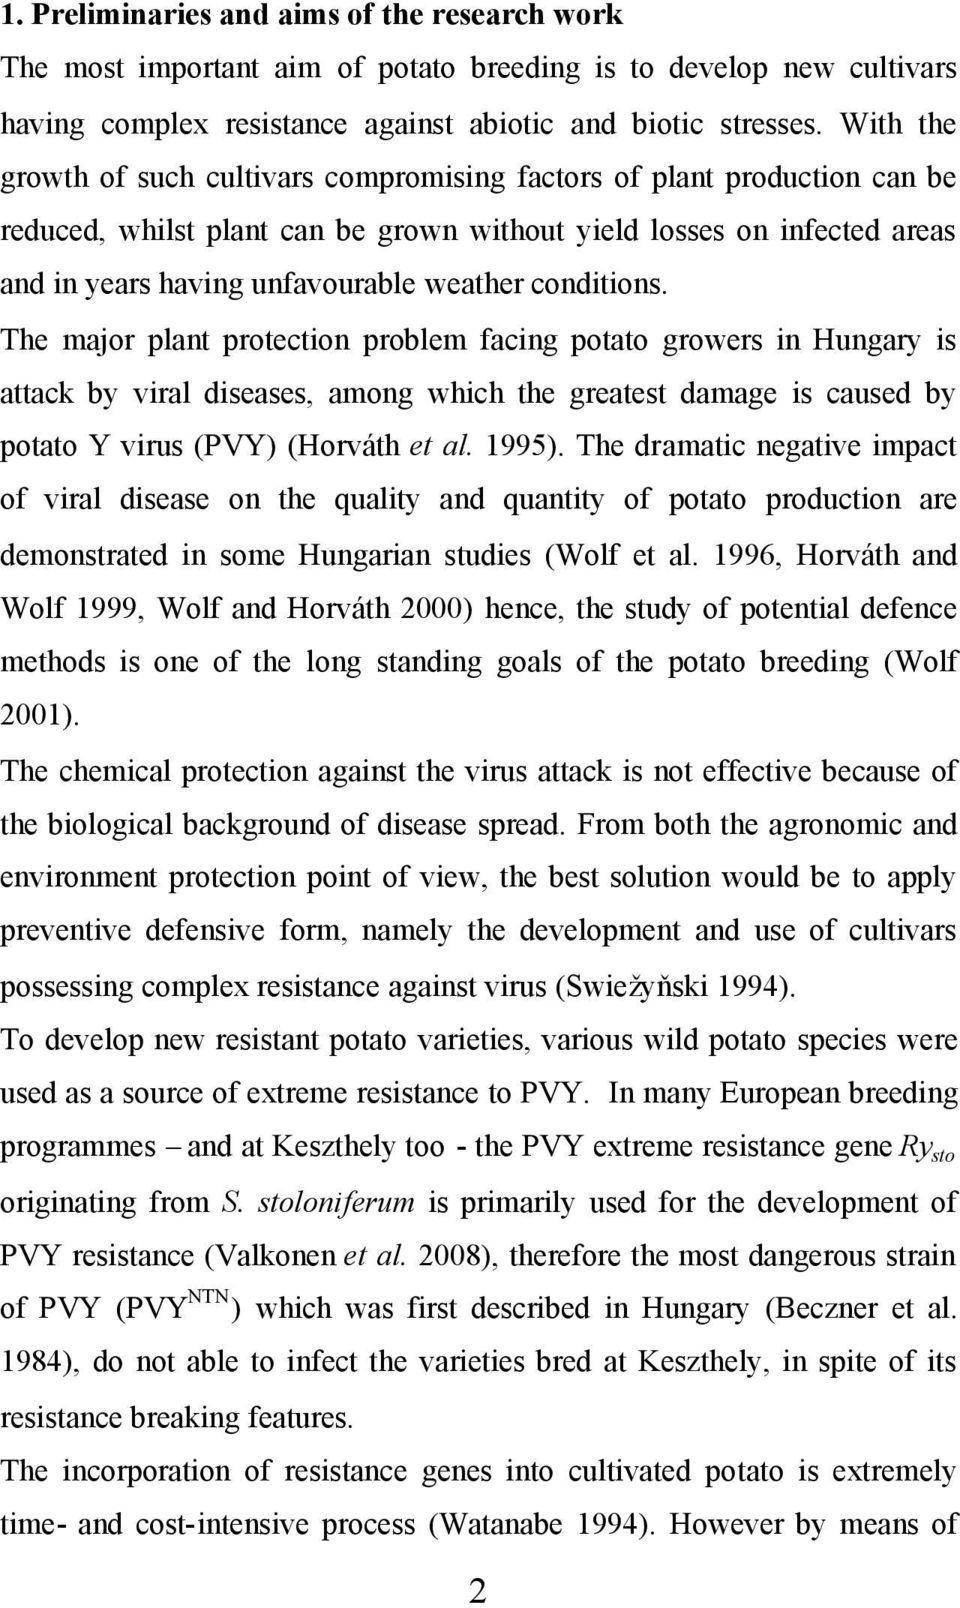 conditions. The major plant protection problem facing potato growers in Hungary is attack by viral diseases, among which the greatest damage is caused by potato Y virus (PVY) (Horváth et al. 1995).